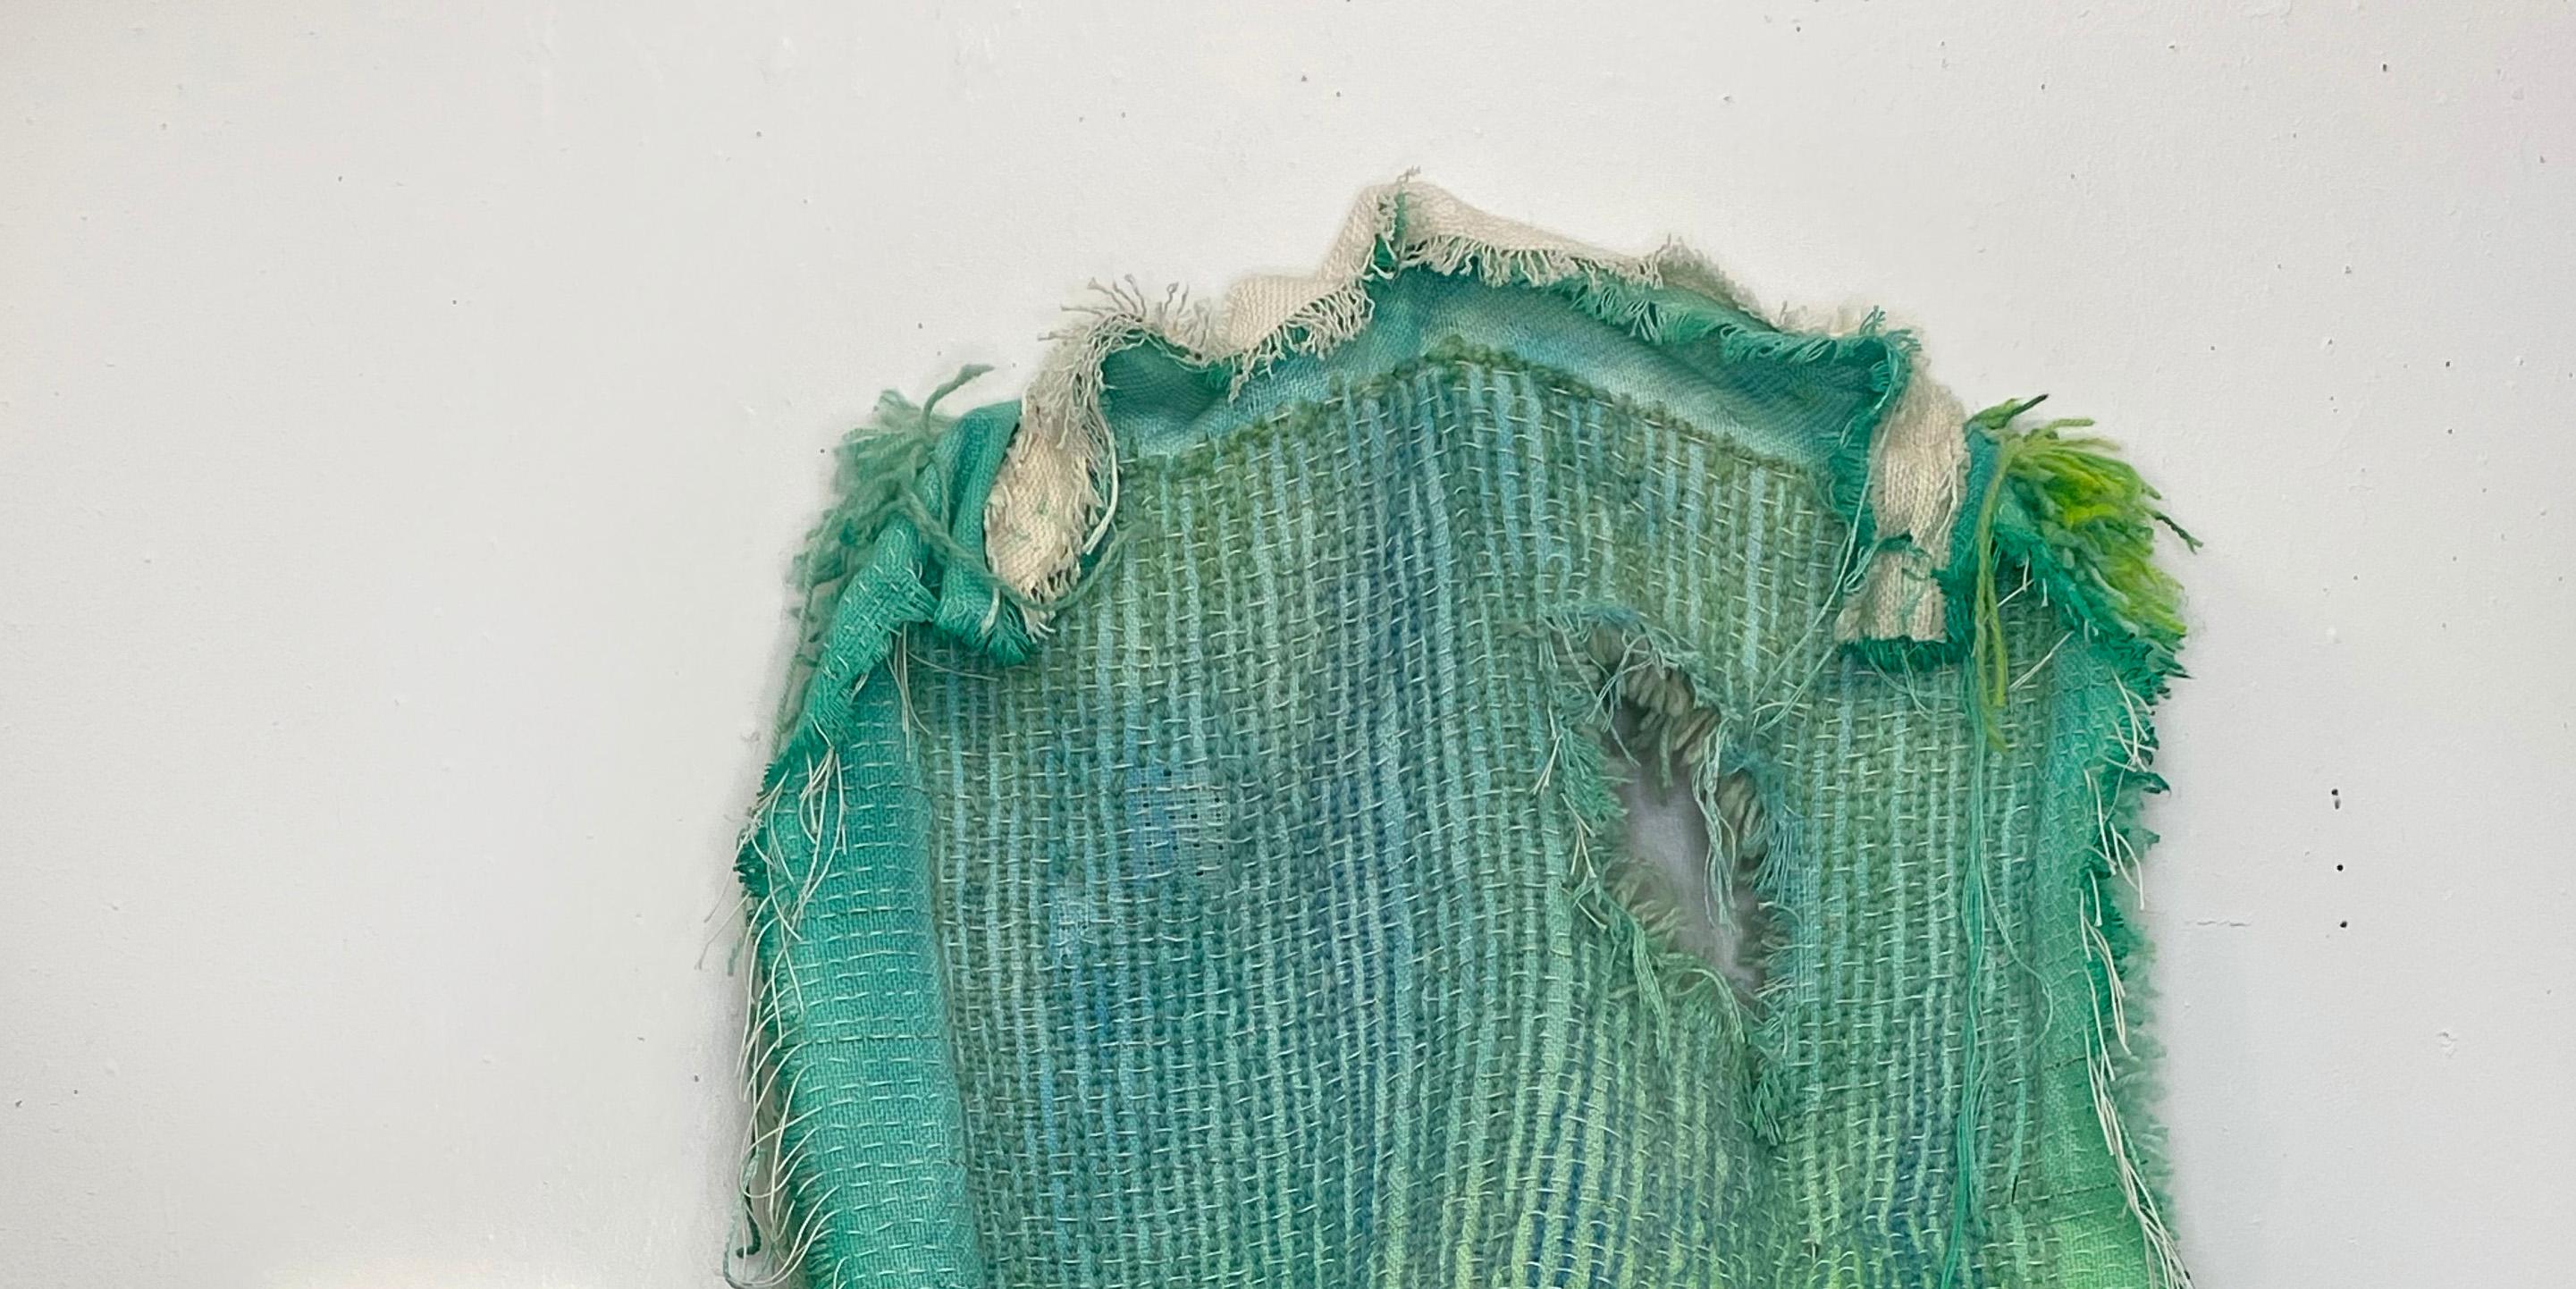 Textile Wall Sculpture: 'GREENSLEEVE' - Contemporary Mixed Media Art by Judy Rushin-Knopf